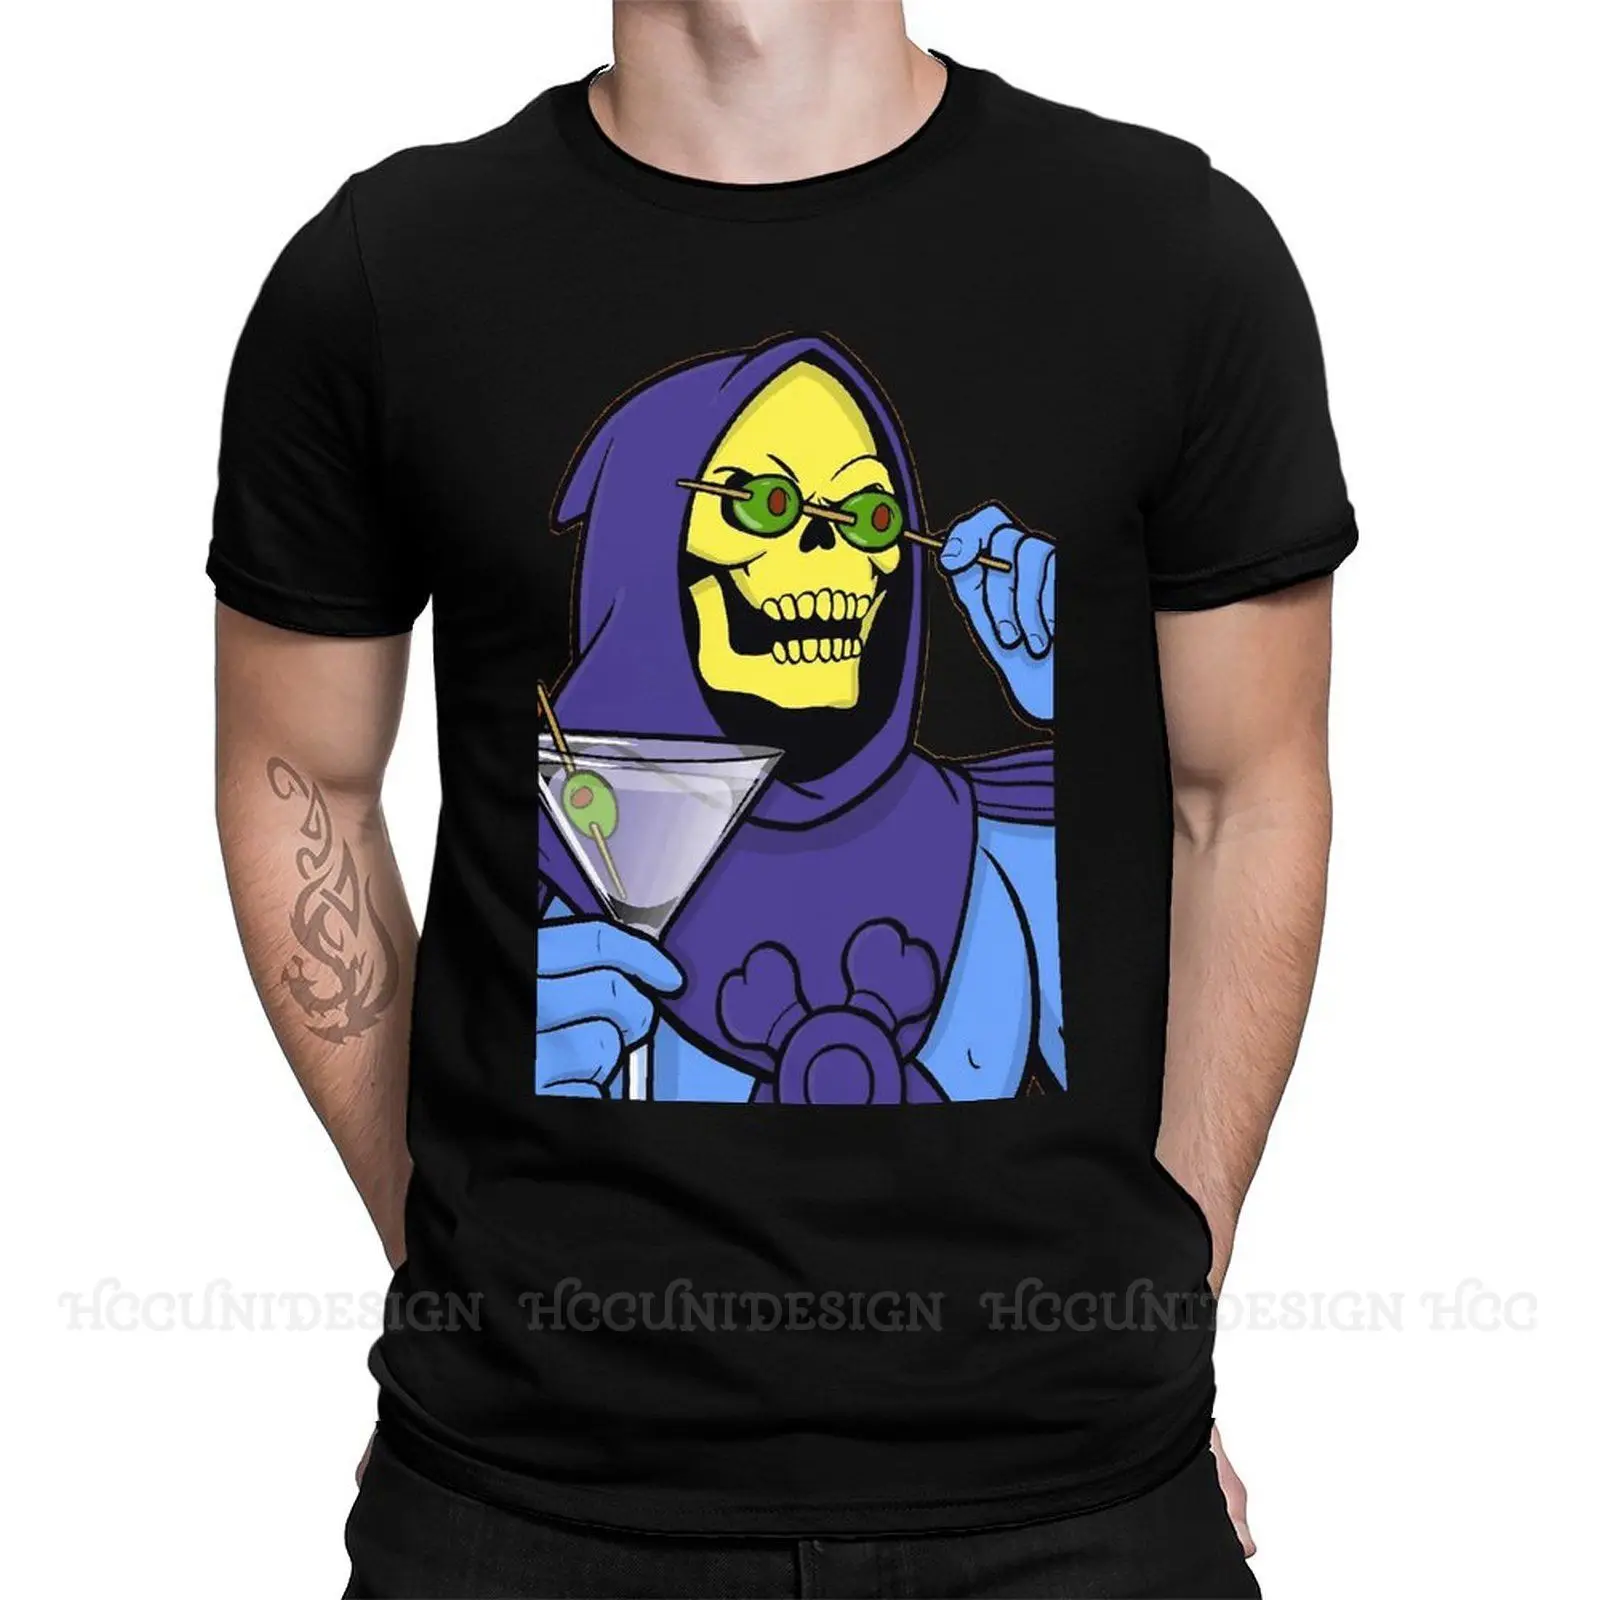 Men T Shirts Anime He-Man and The Masters of The Universe Funny Tee Shirt Party Skeletor Short Sleeve T-Shirt Pure Cotton Adult